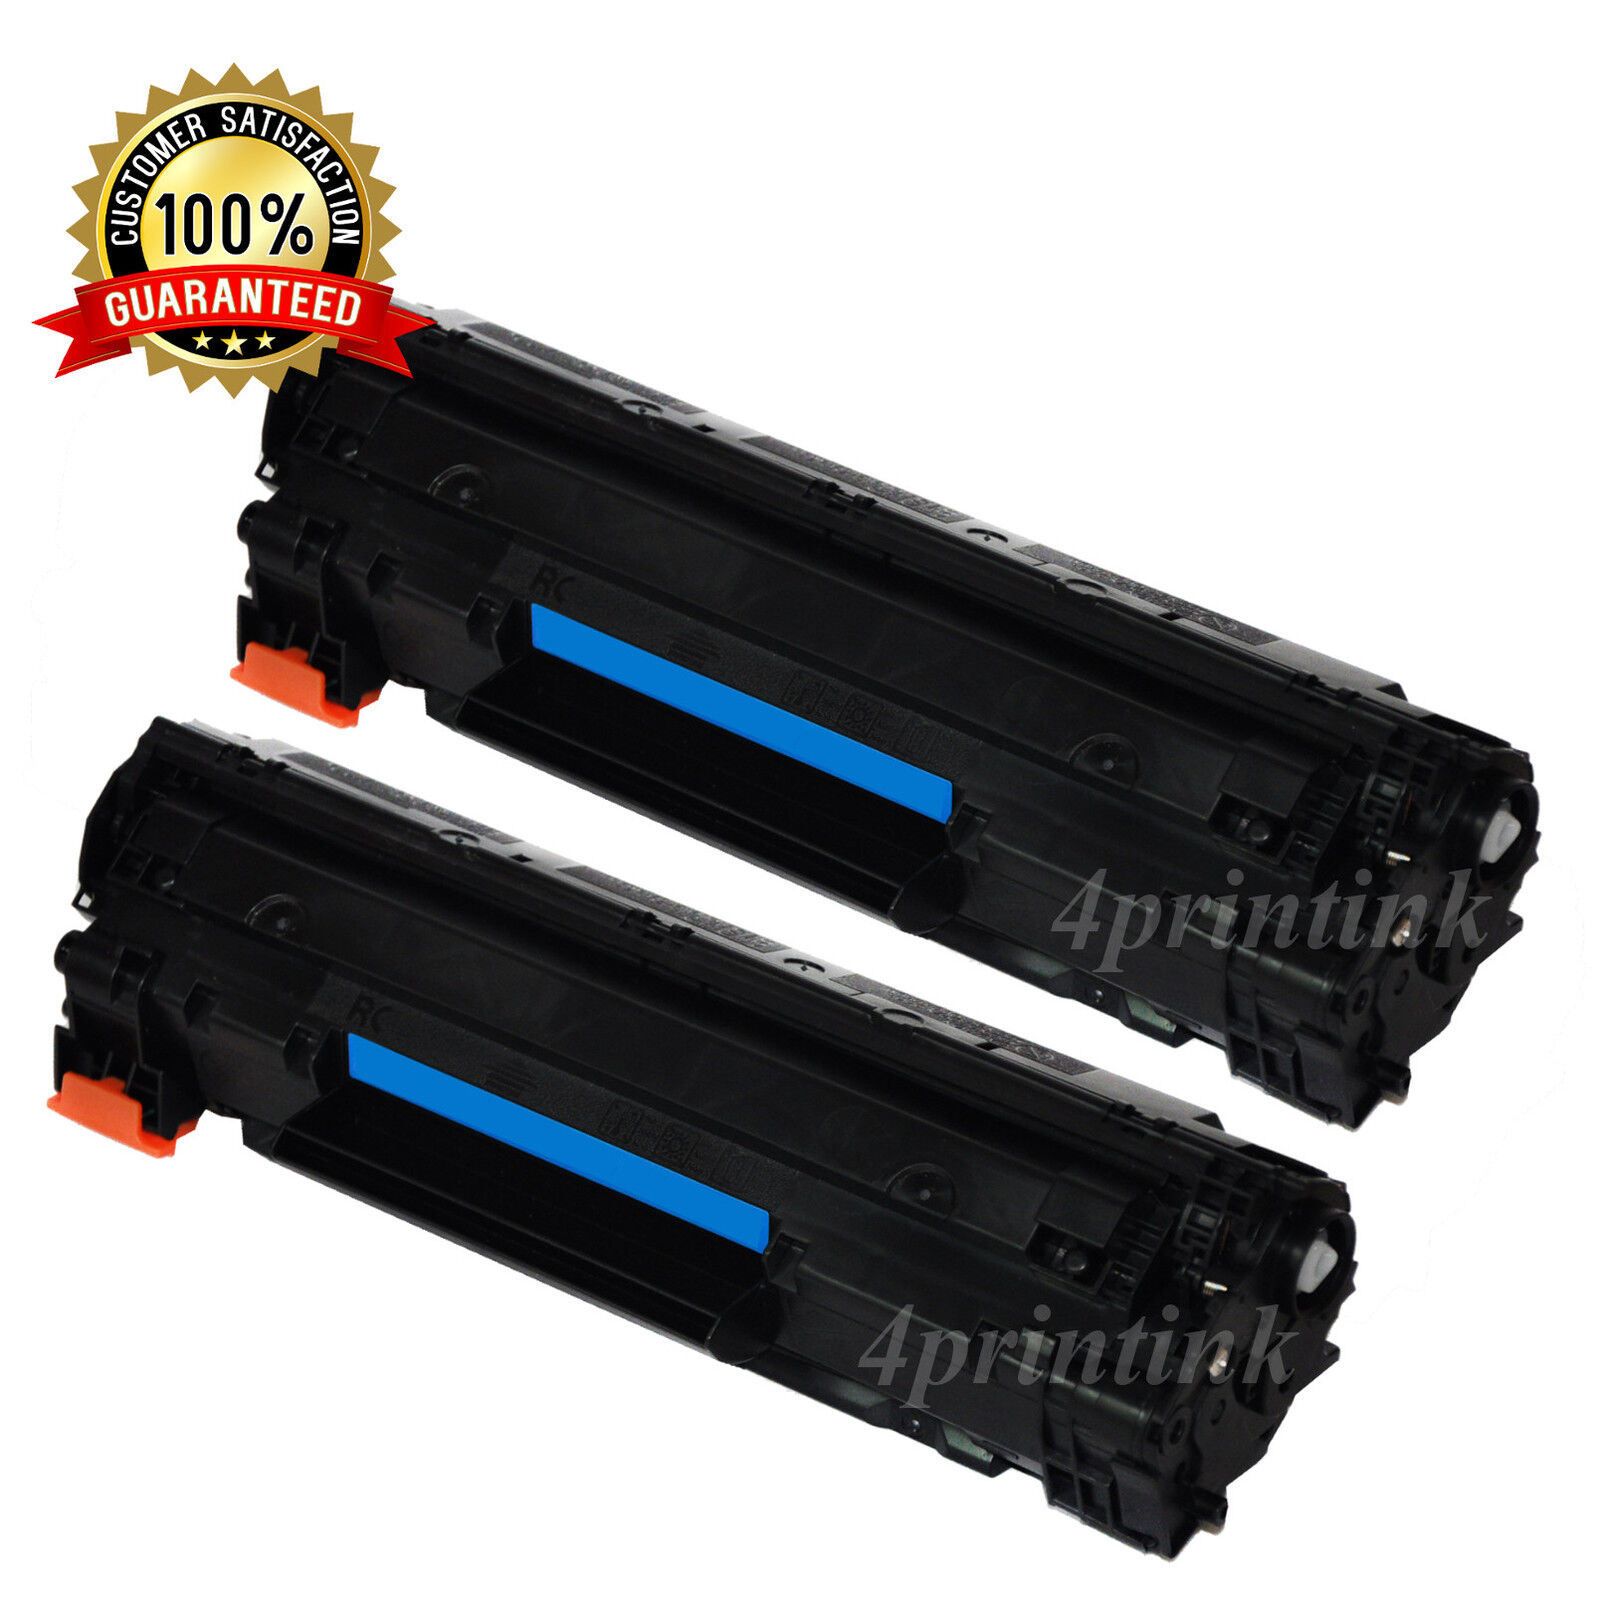 2-Pack CF283A 83A Toner Compatible With HP LaserJet Pro MFP M127fn M125nw M125a